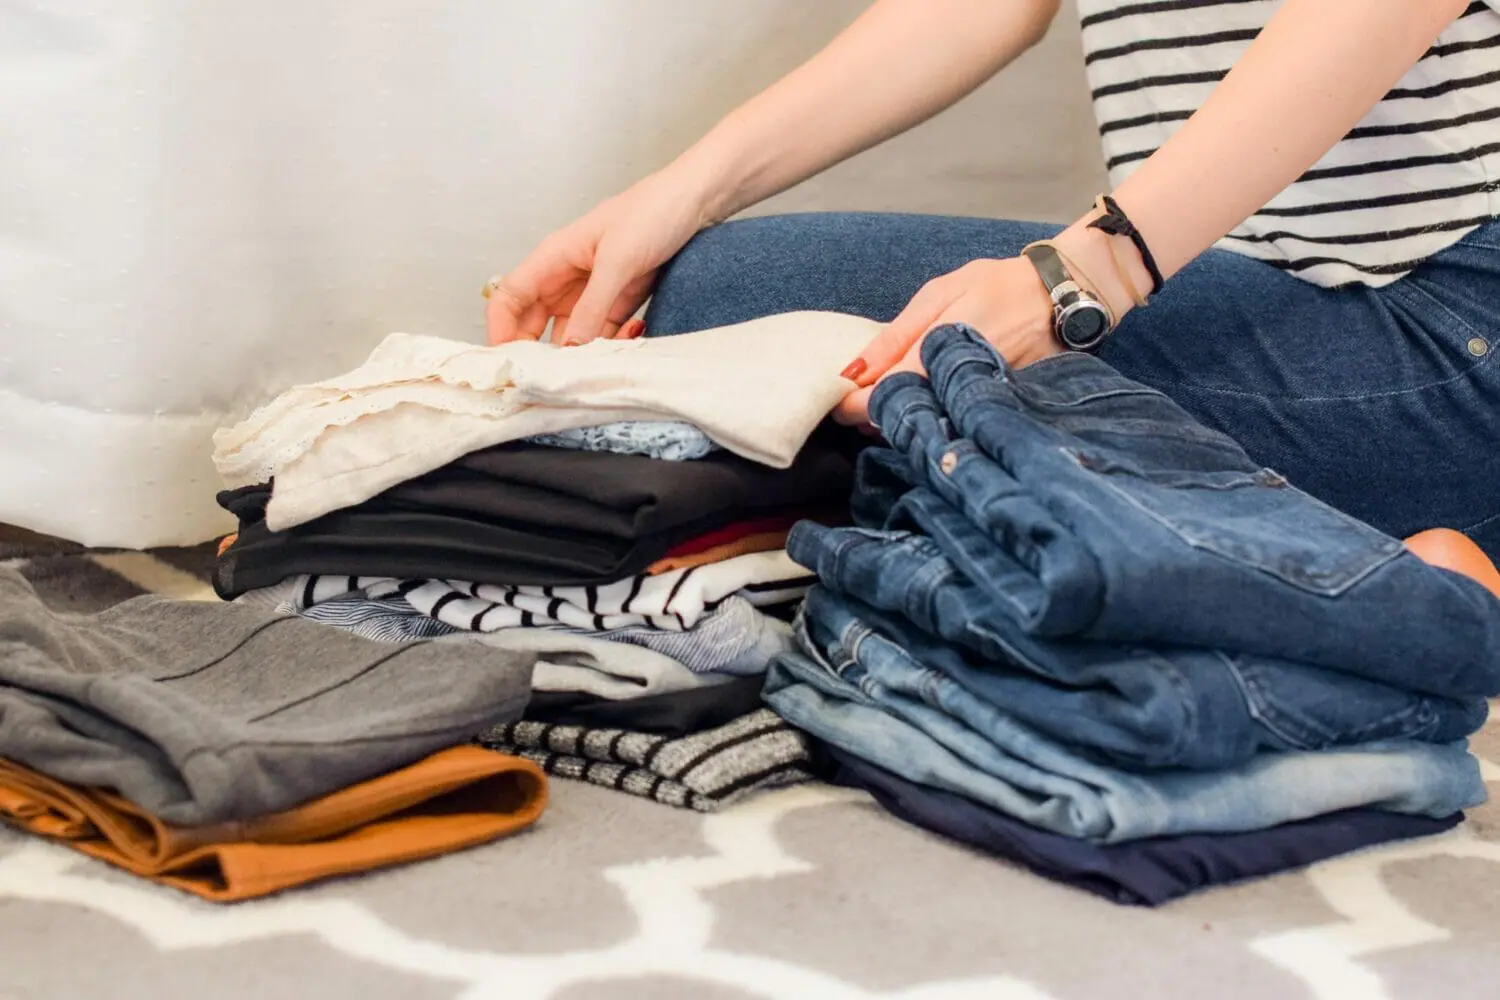 In this image: A person folds a pile of clothes.